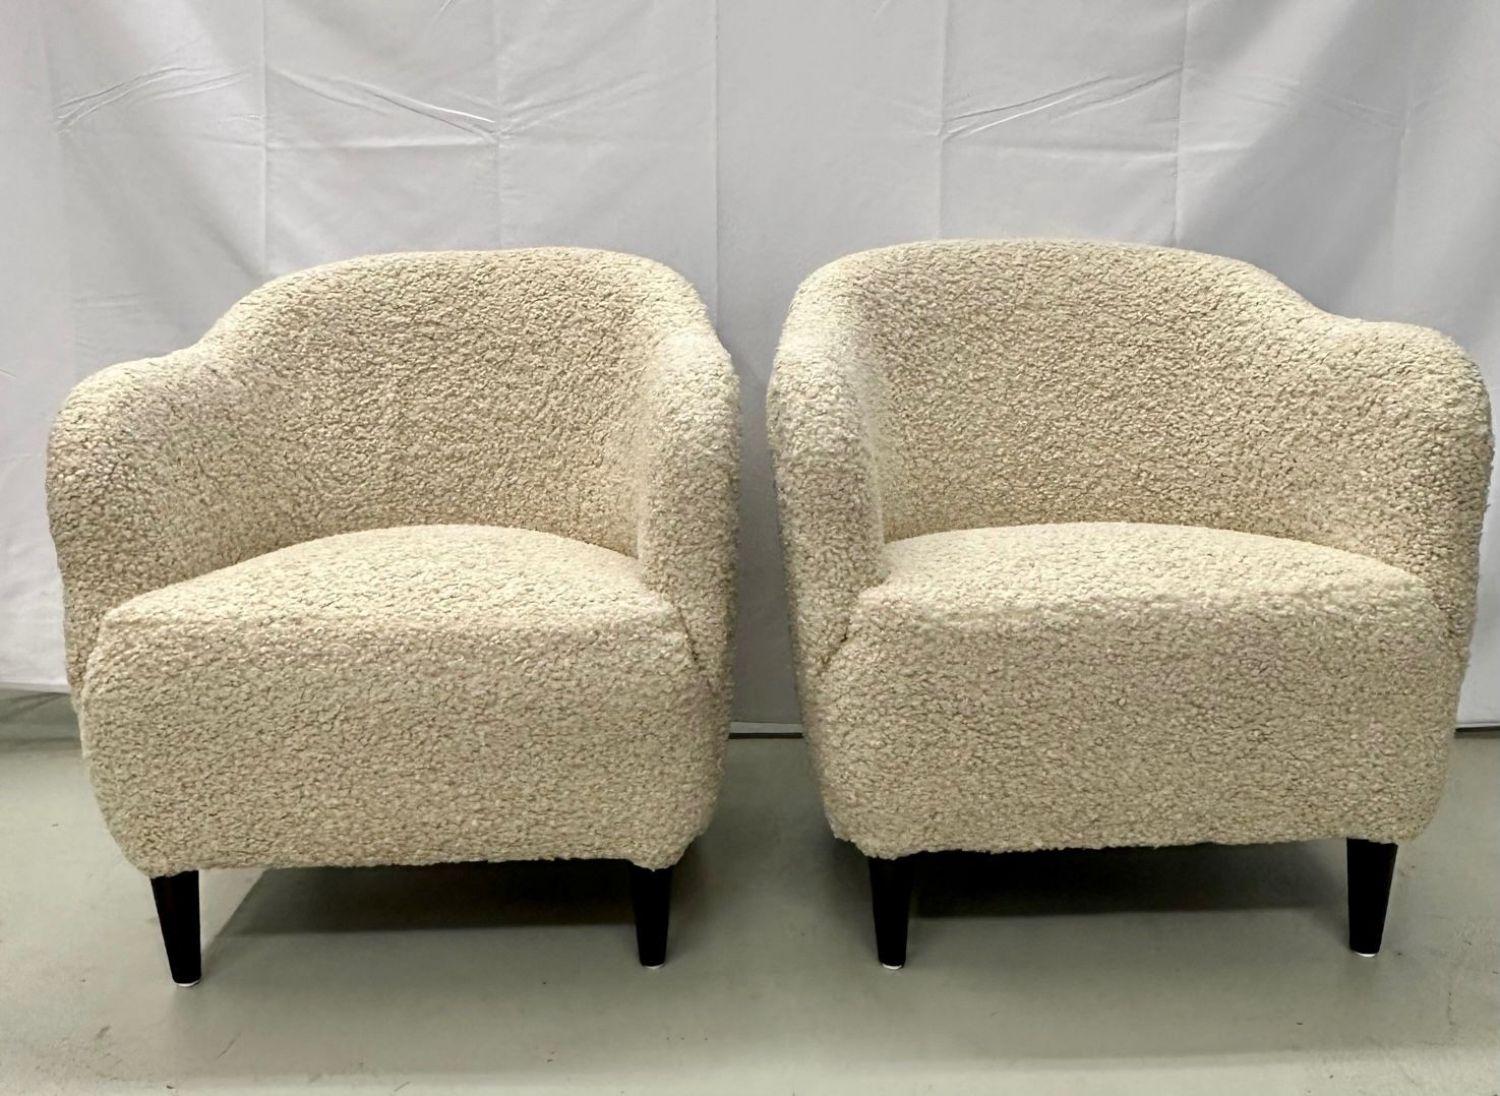 Pair of Mid-Century Modern danish lounge / club chairs, boucle, Denmark, 1950s
Low profile pair of mid-century lounge or club chairs designed and produced in Denmark, 1950s. Newly upholstered in a thick luxurious beige boucle/faux Sherpa fabric.